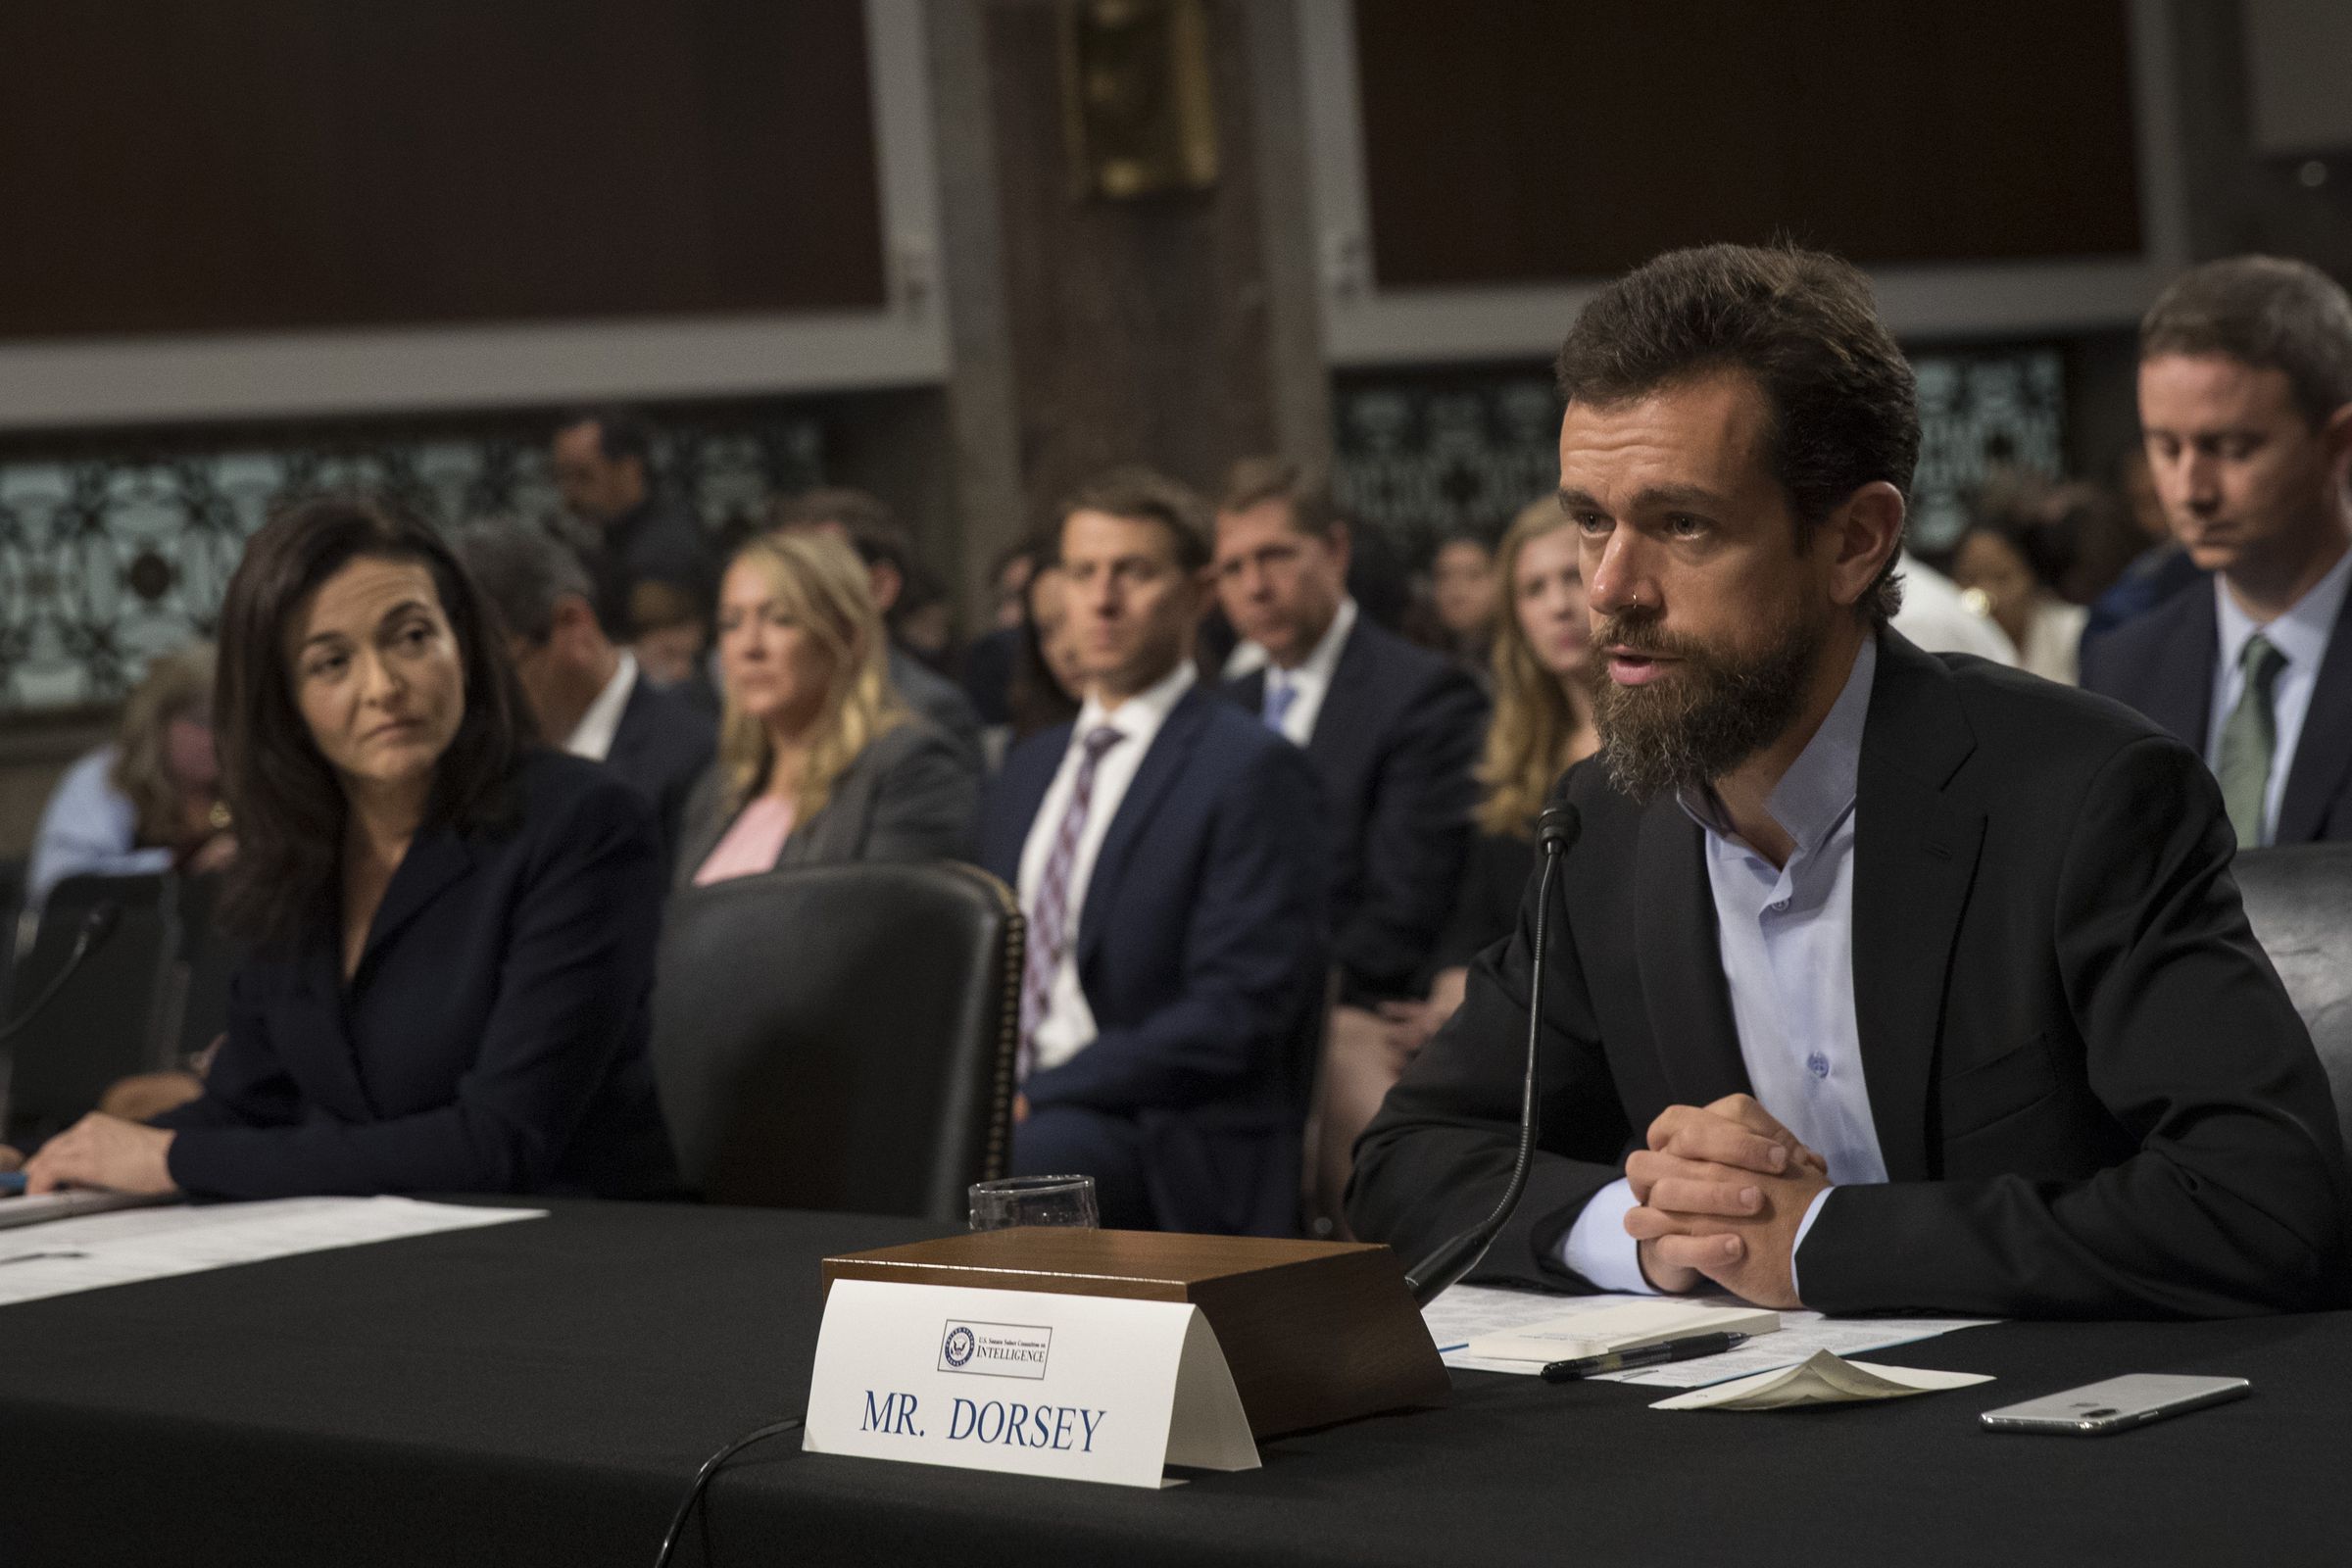 Twitter CEO Jack Dorsey And Facebook COO Sheryl Sandberg Testify To Senate Committee On Foreign Influence Operations